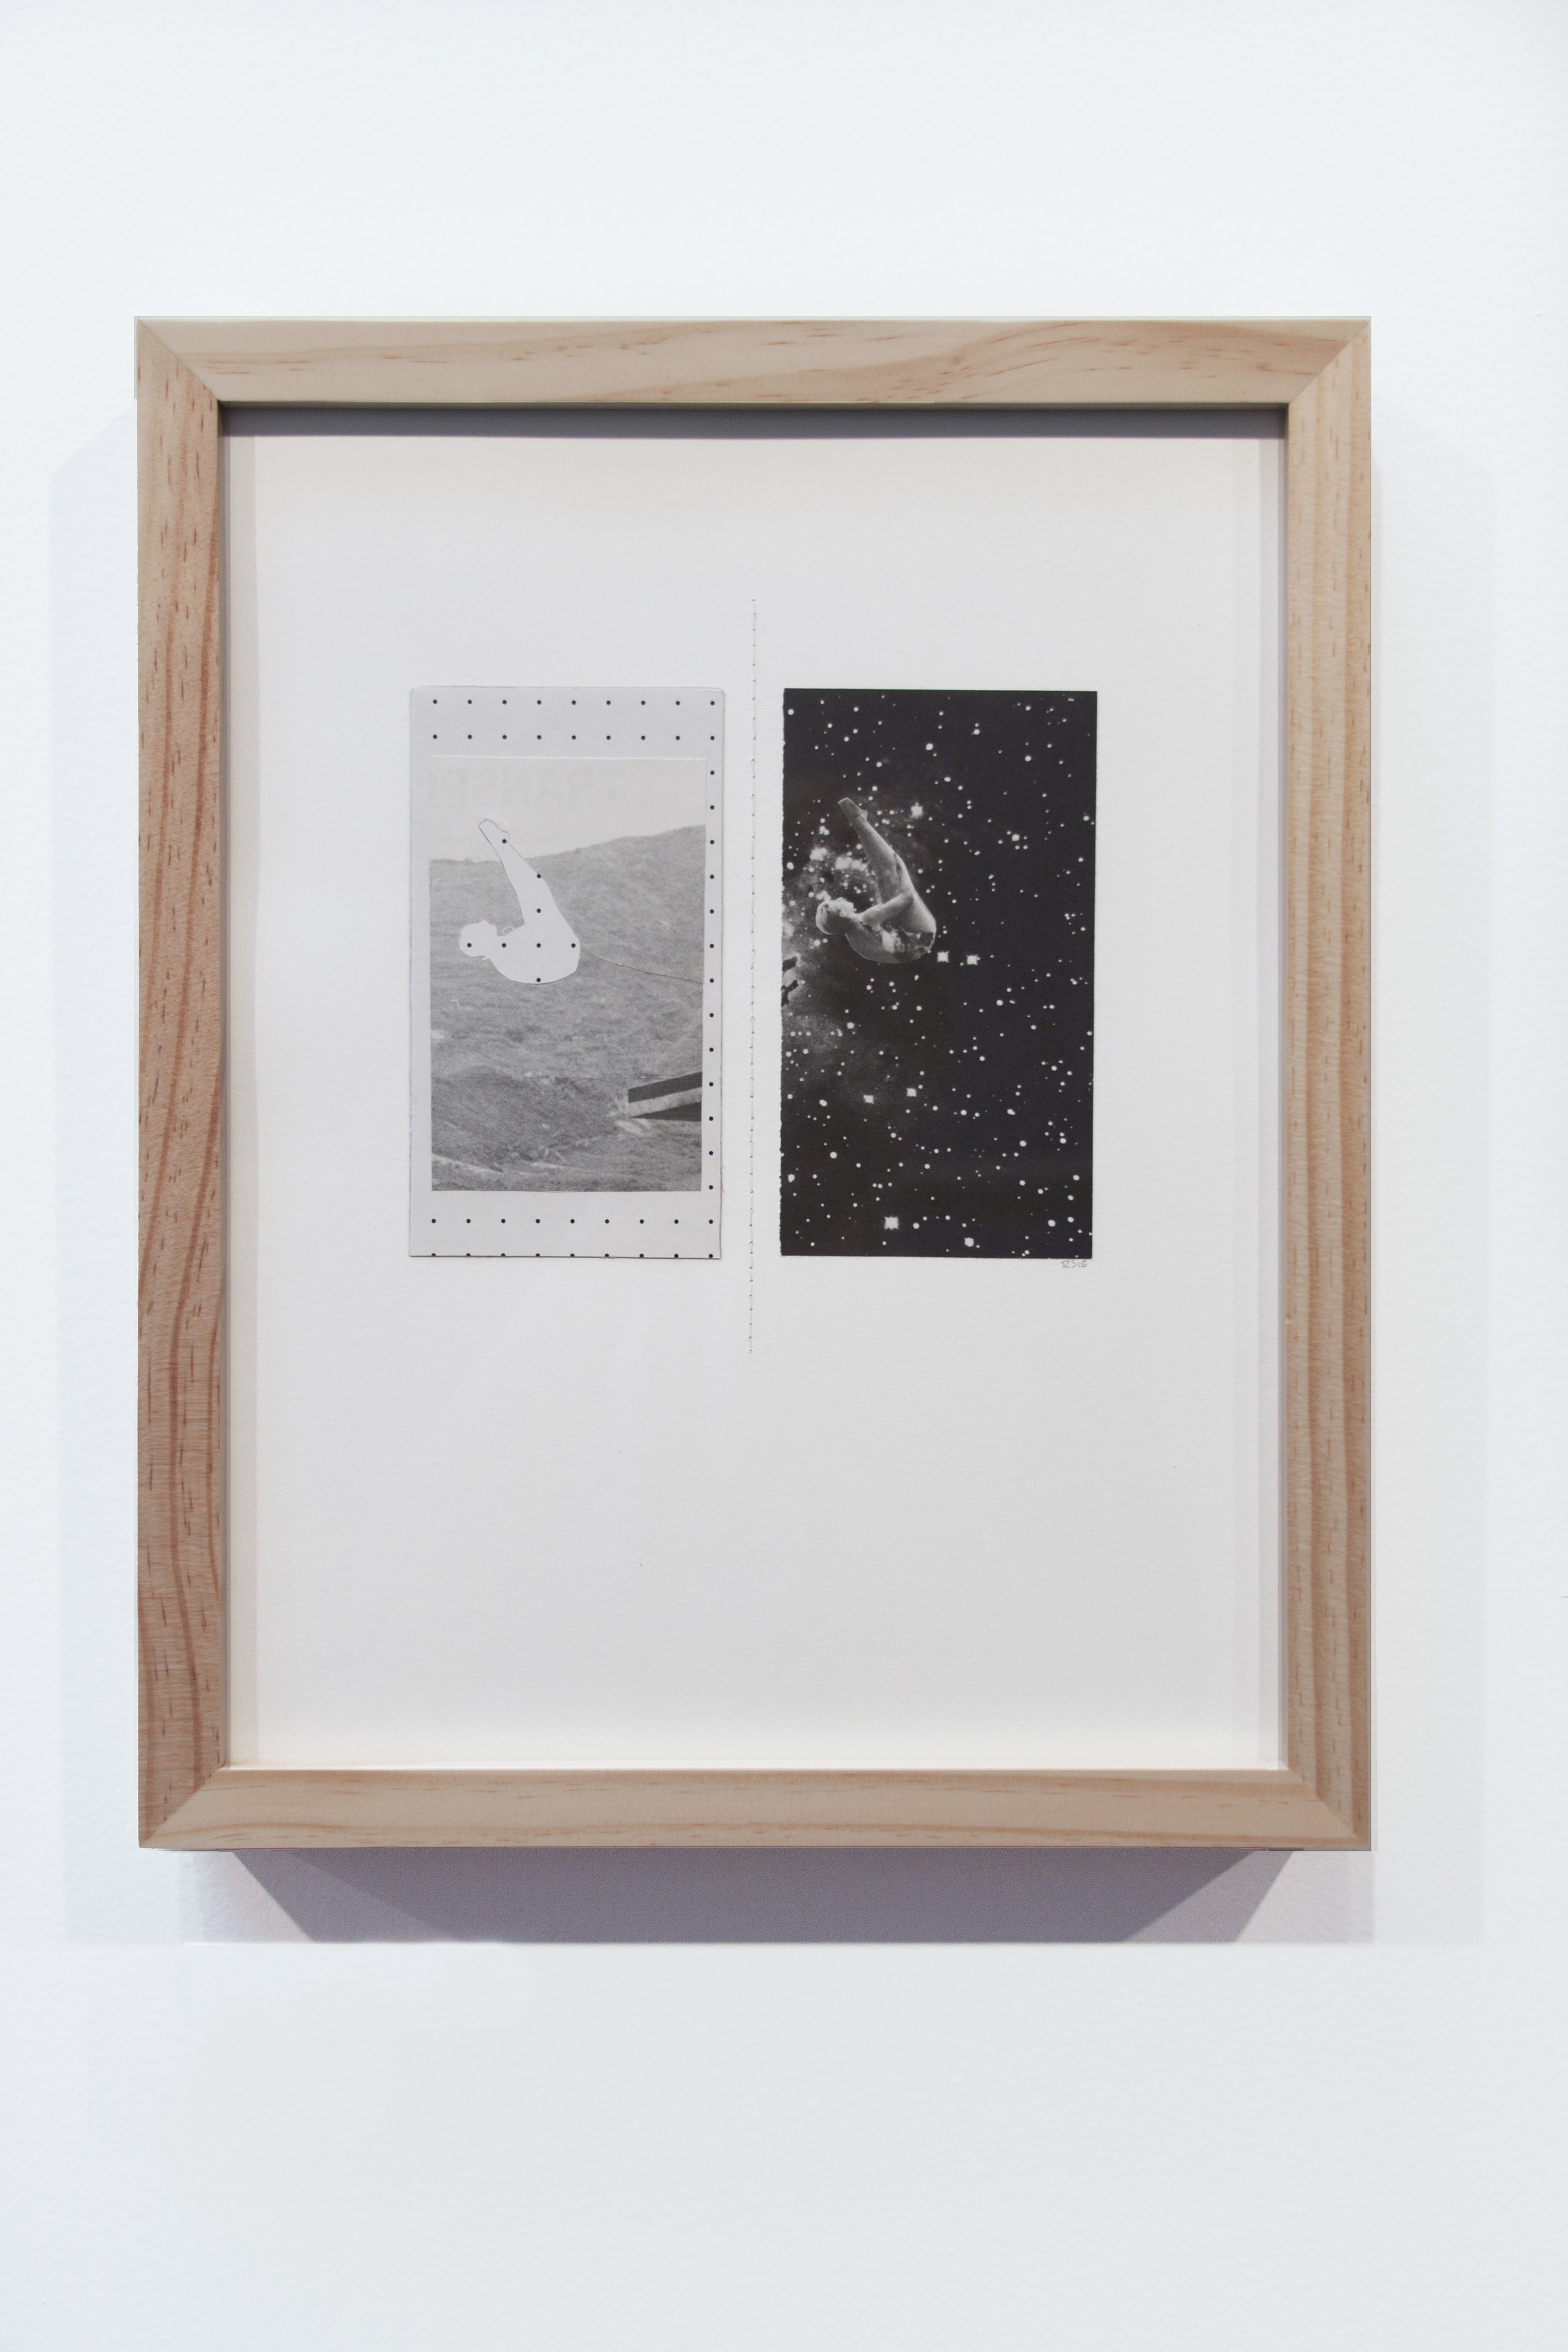   Lacerations and Oscillations , 11” x 14”, Thread on Found Images, 2015 Photo: Jenna Gard 